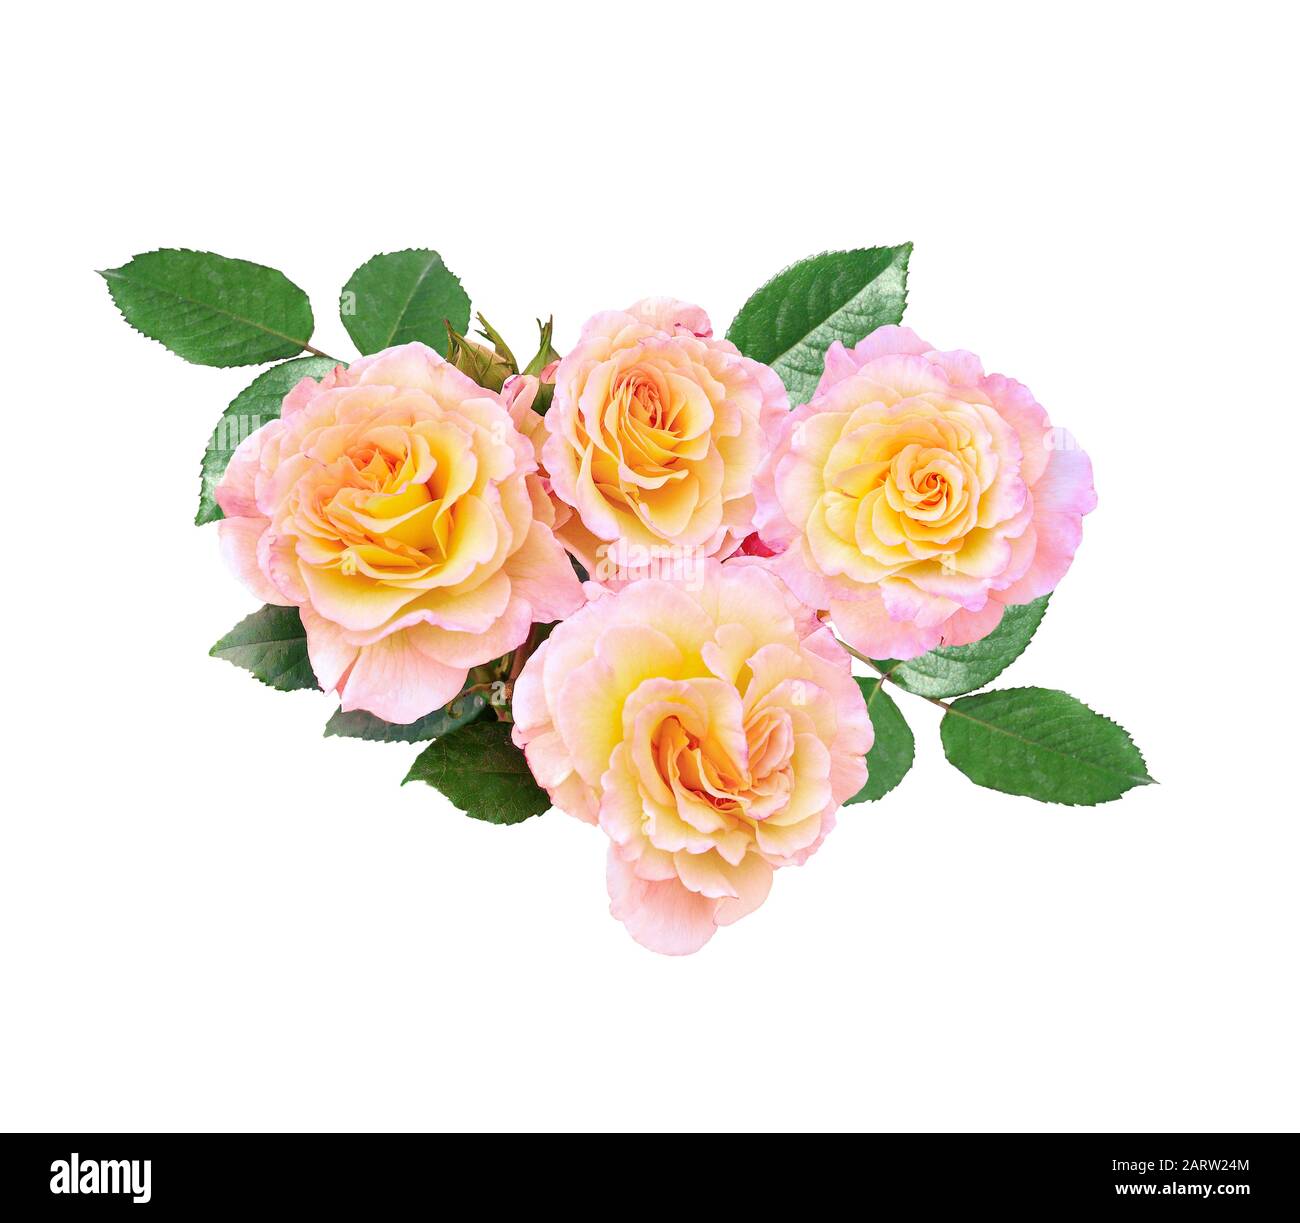 Bunch of gentle pink-yellow rose flowers with buds and green leaves  isolated on white background. Delicate elegant floral pattern for any festive des Stock Photo